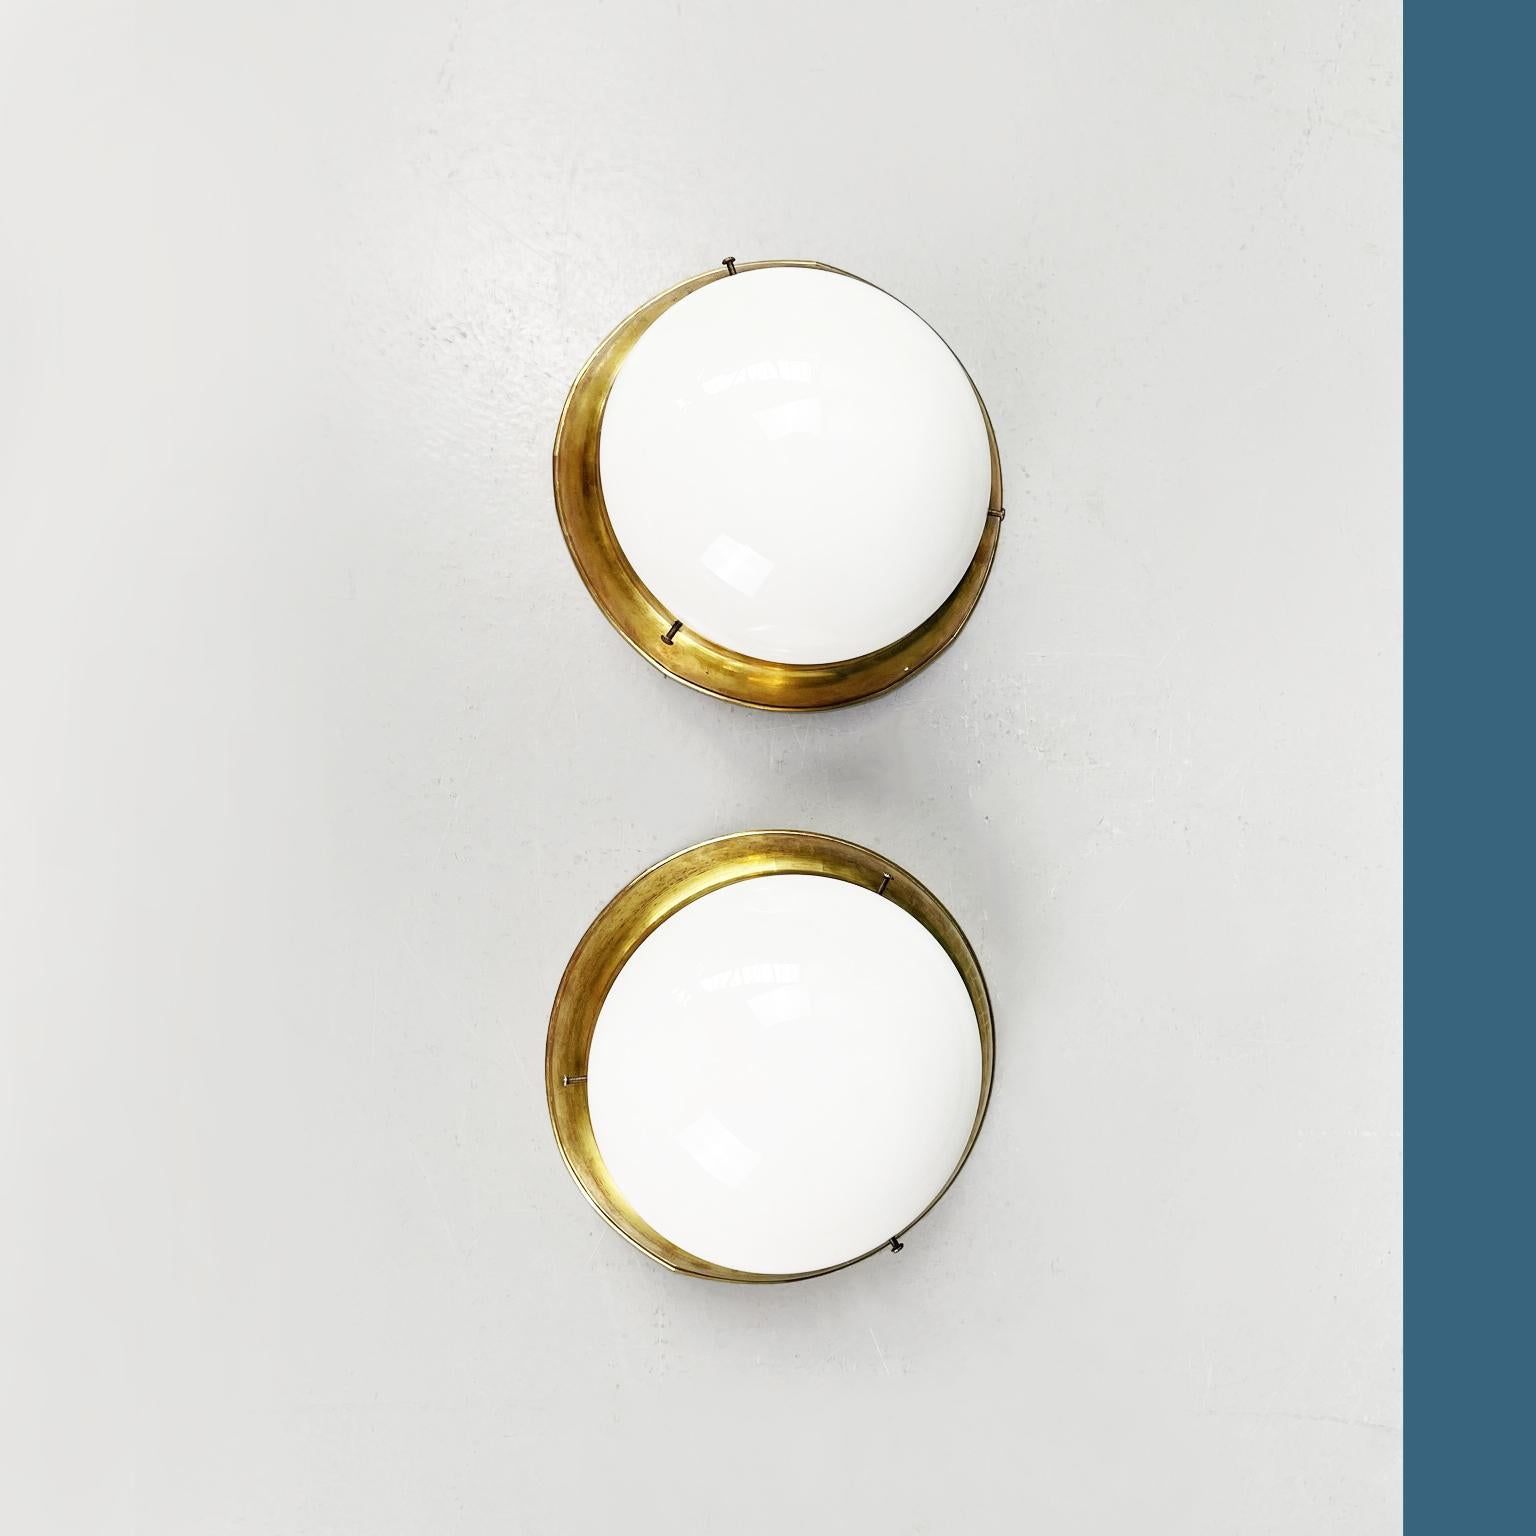 Italian mid-century modern Brass and opaline glass round wall lights, 1960s
Pair of round wall lights in opaline glass and brass. The lampshade is composed of a semi-sphere in opal glass. The structure is in brass with visible pegs.

1960s.

Very